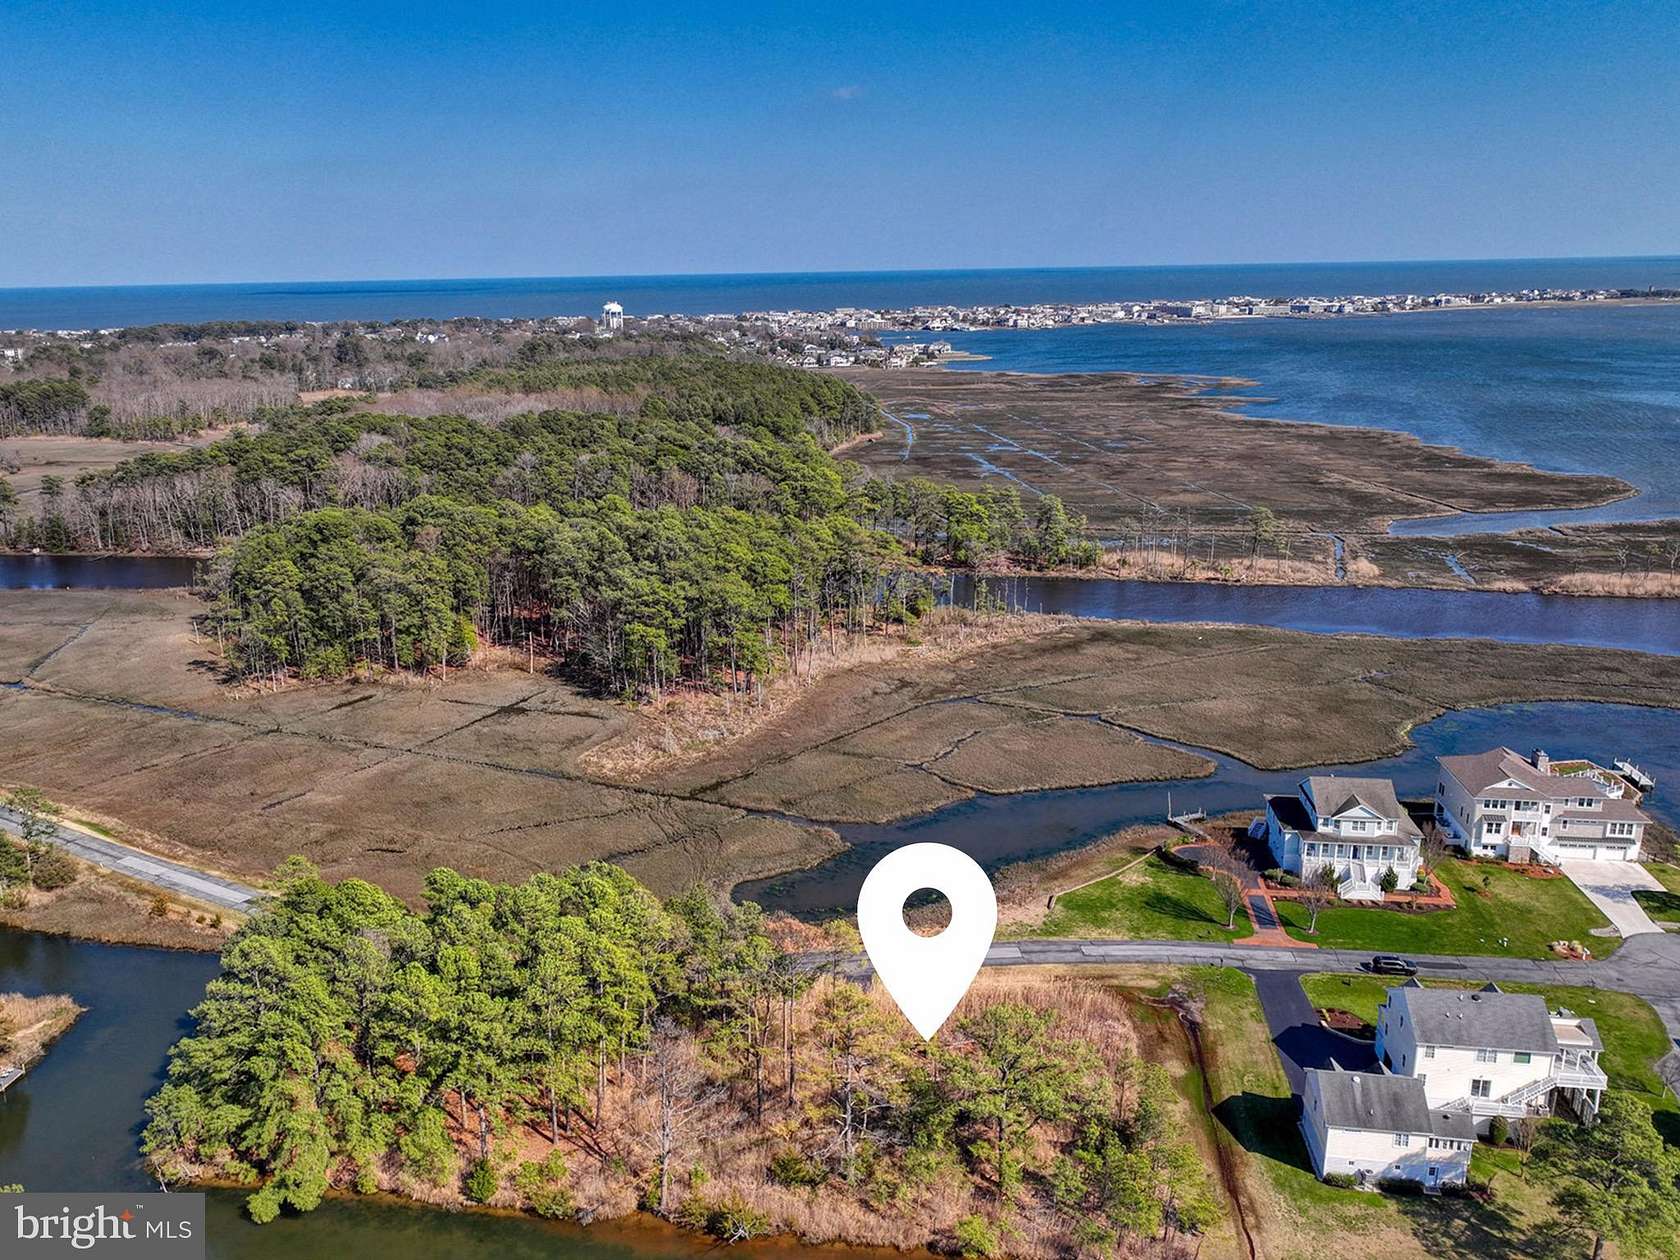 0.51 Acres of Residential Land for Sale in Rehoboth Beach, Delaware